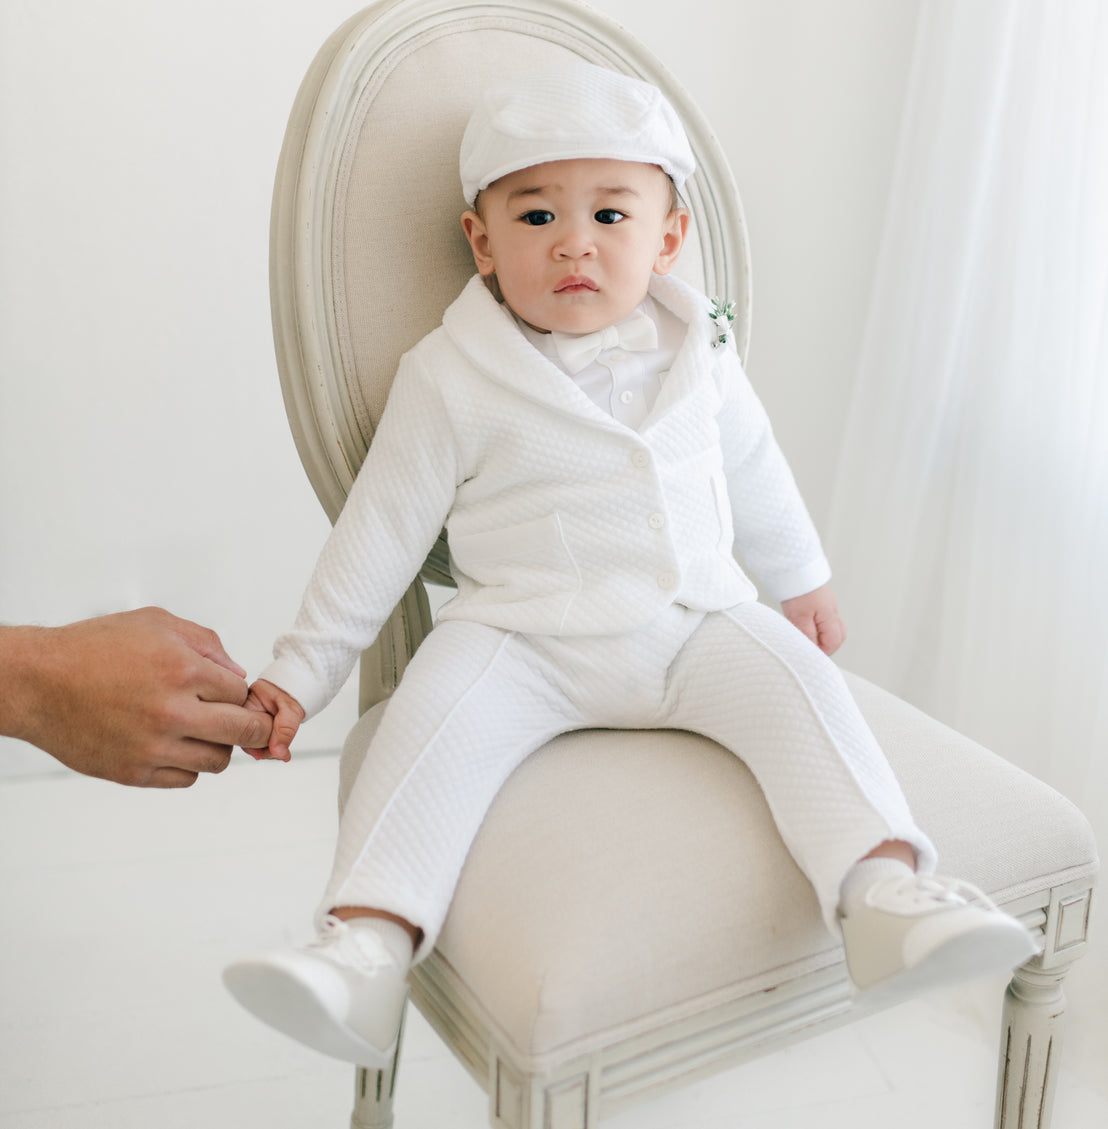 A baby dressed in the Elijah 3-Piece Set, complete with a jacket, pants, and onesie, sits on a beige upholstered chair. An adult hand gently holds the baby’s hand, providing support. The baby is also wearing a matching Elijah Newsboy Cap and White Velvet Bowtie & Boutonniere. The background is a softly lit white room.